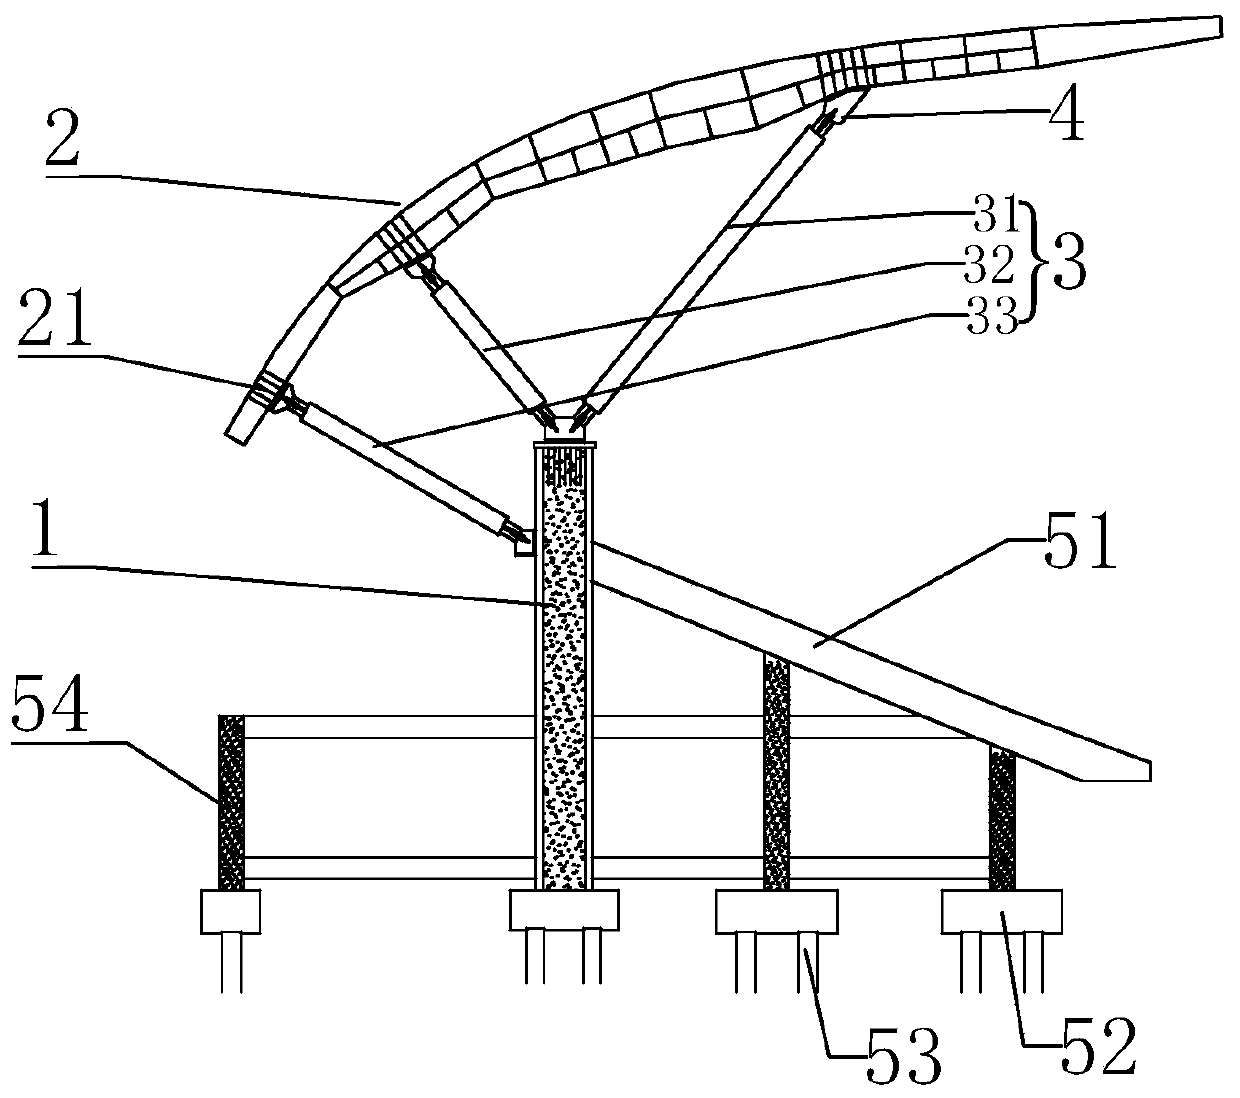 Buckling restrained brace large cantilever structure system